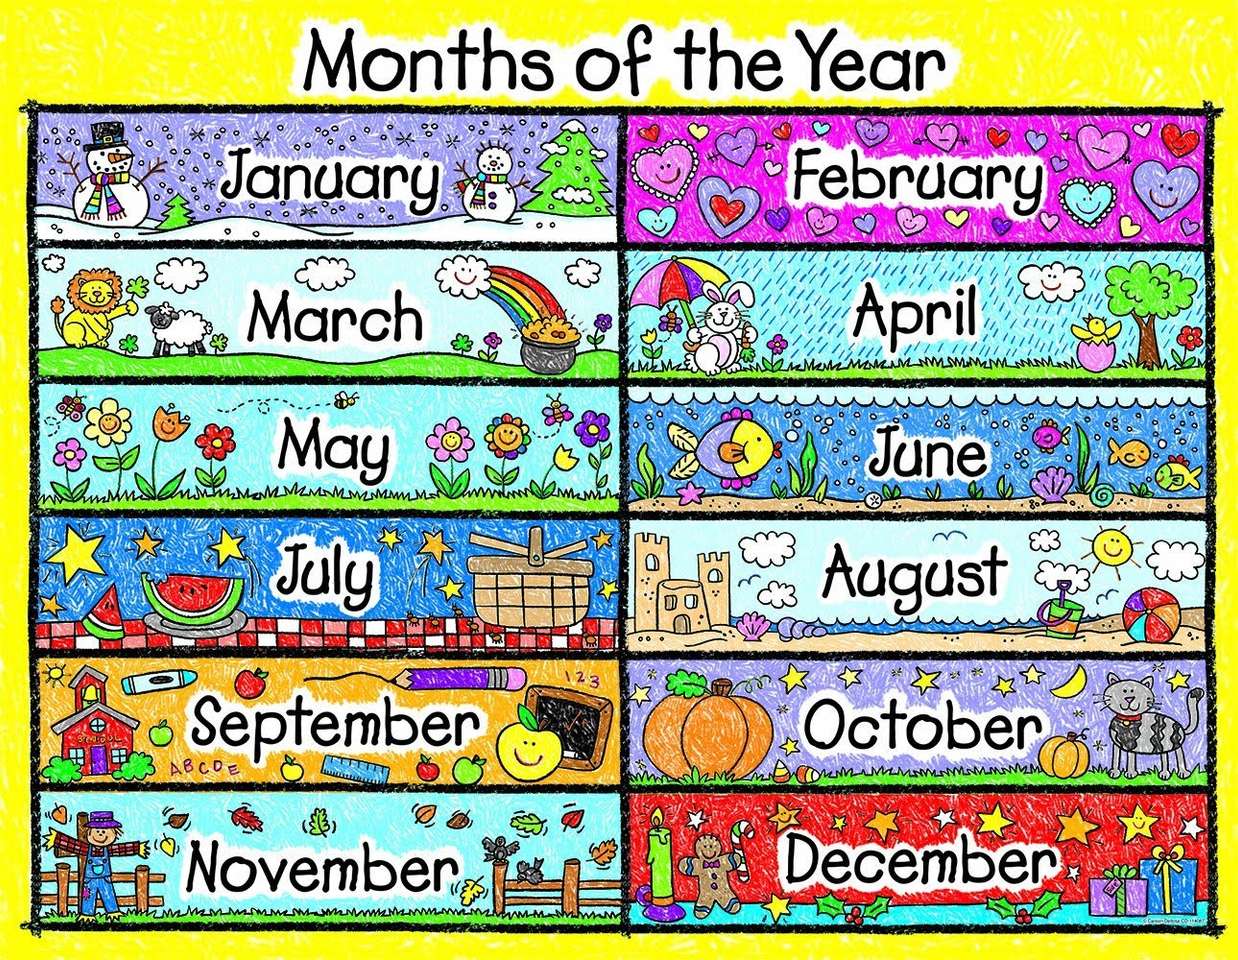 Months of the year puzzle online from photo